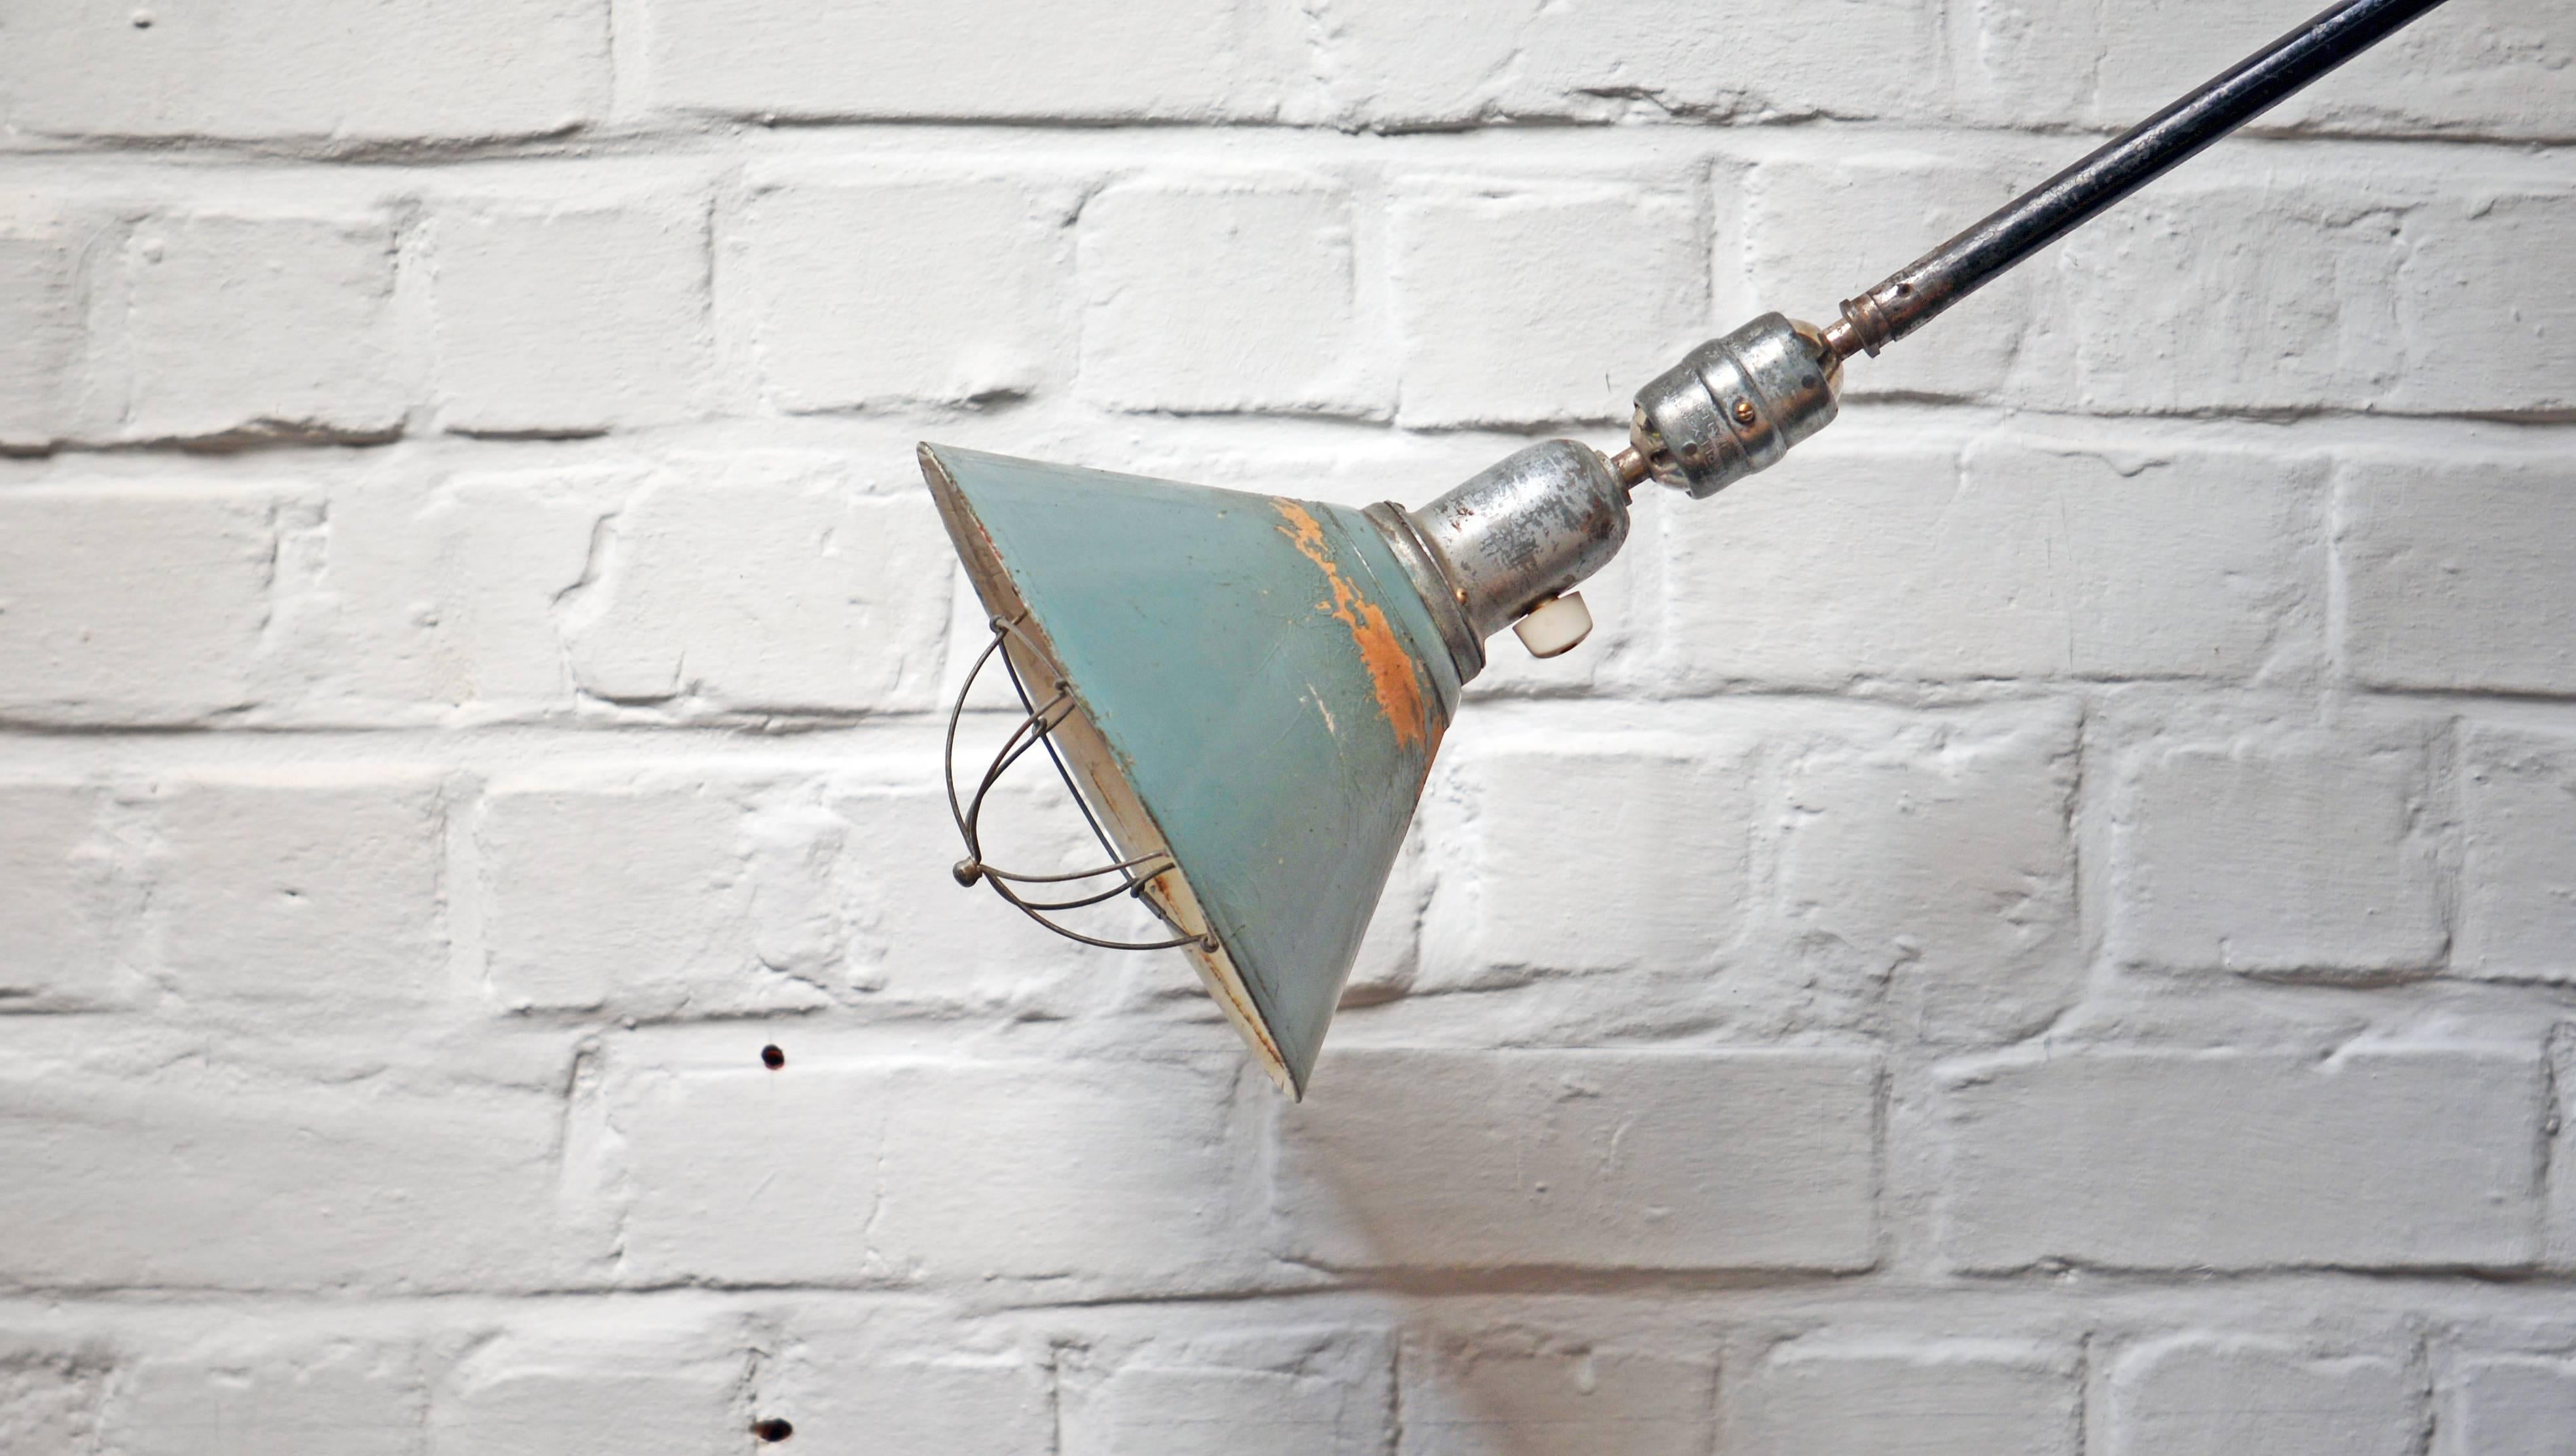 Johan Petter Johansson very rare first edition of the Triplex telescopic lamps with three arms and a weight in metal and porcelain. The lamp can swing from left to right and from up to down. It can be extended to 320cm! The original cap is made of